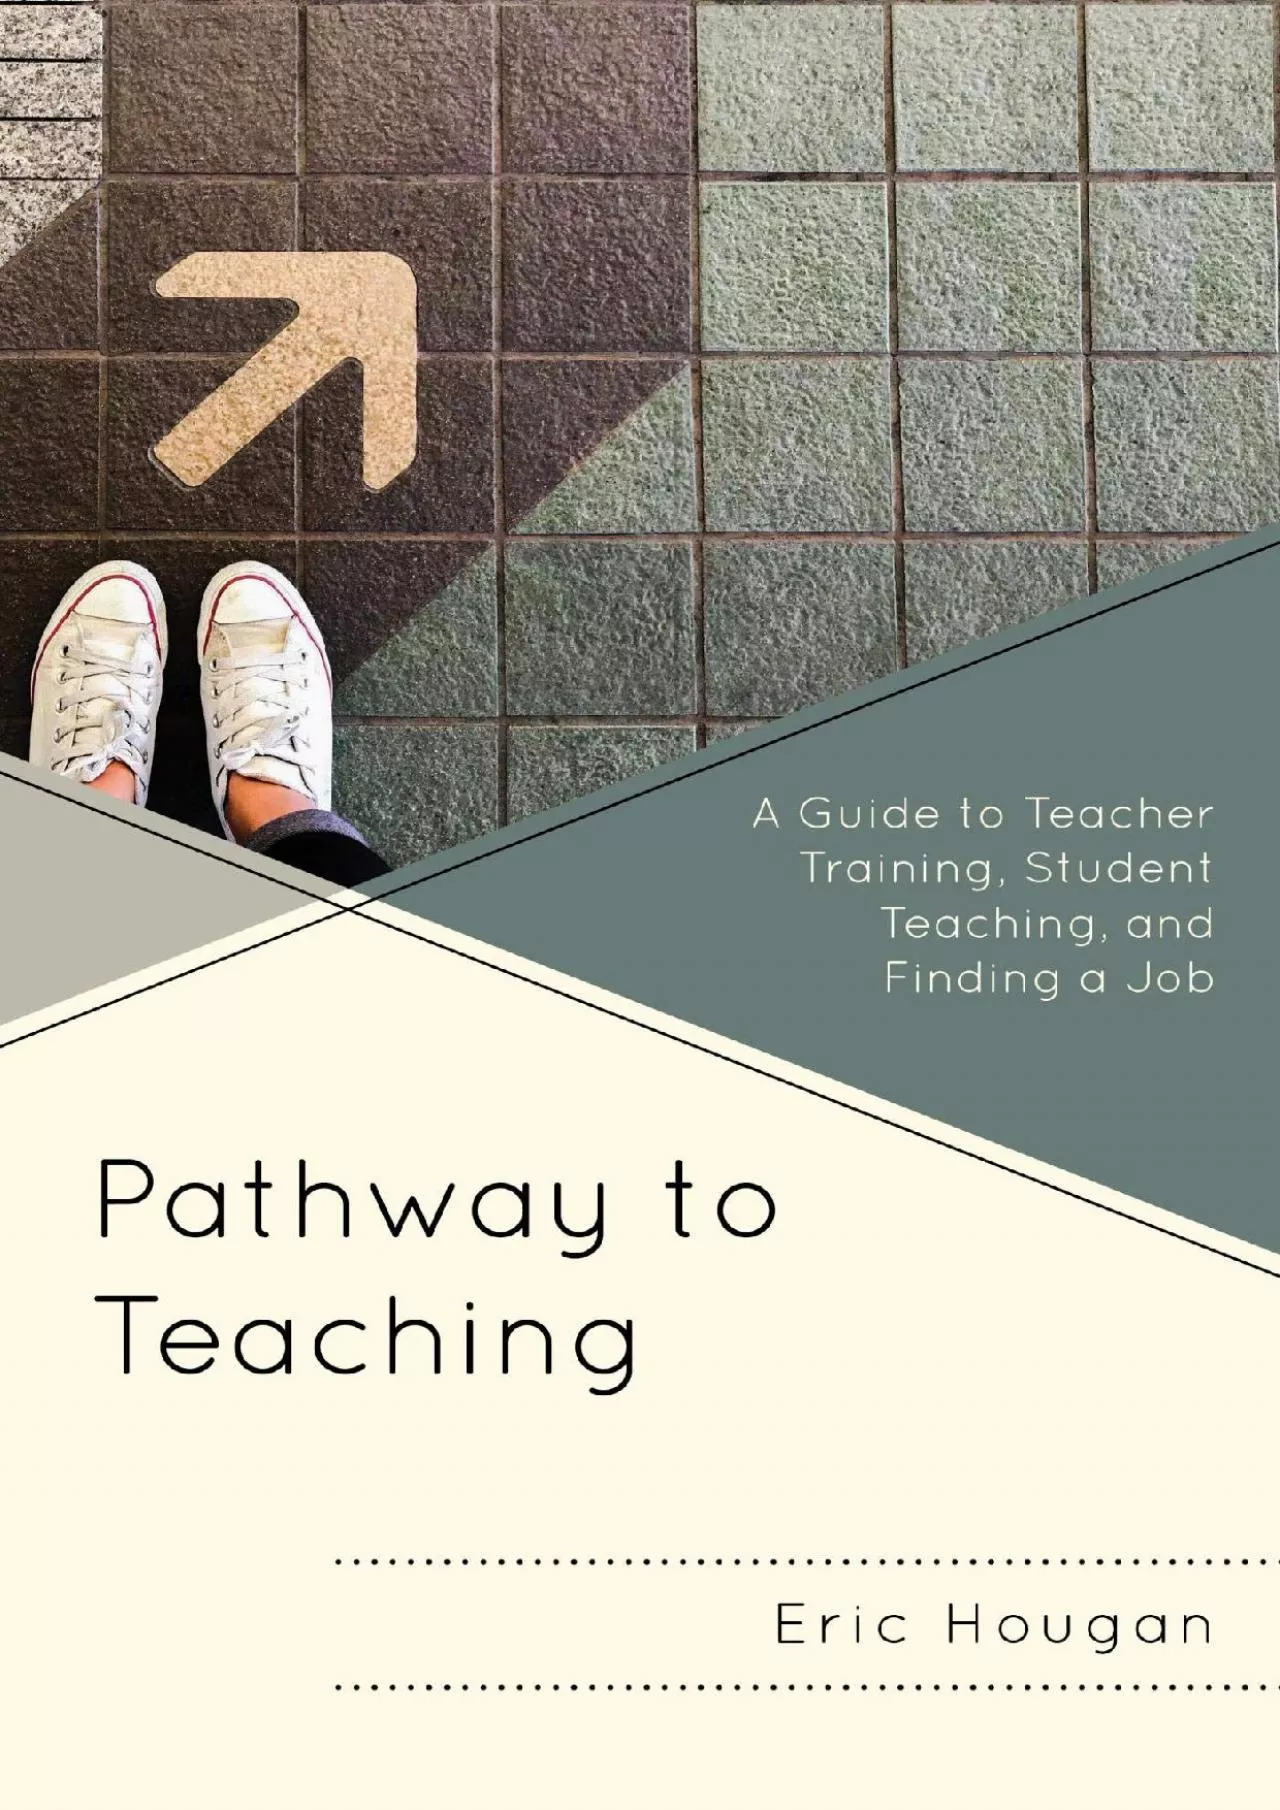 [READ] Pathway to Teaching: A Guide to Teacher Training, Student Teaching, and Finding